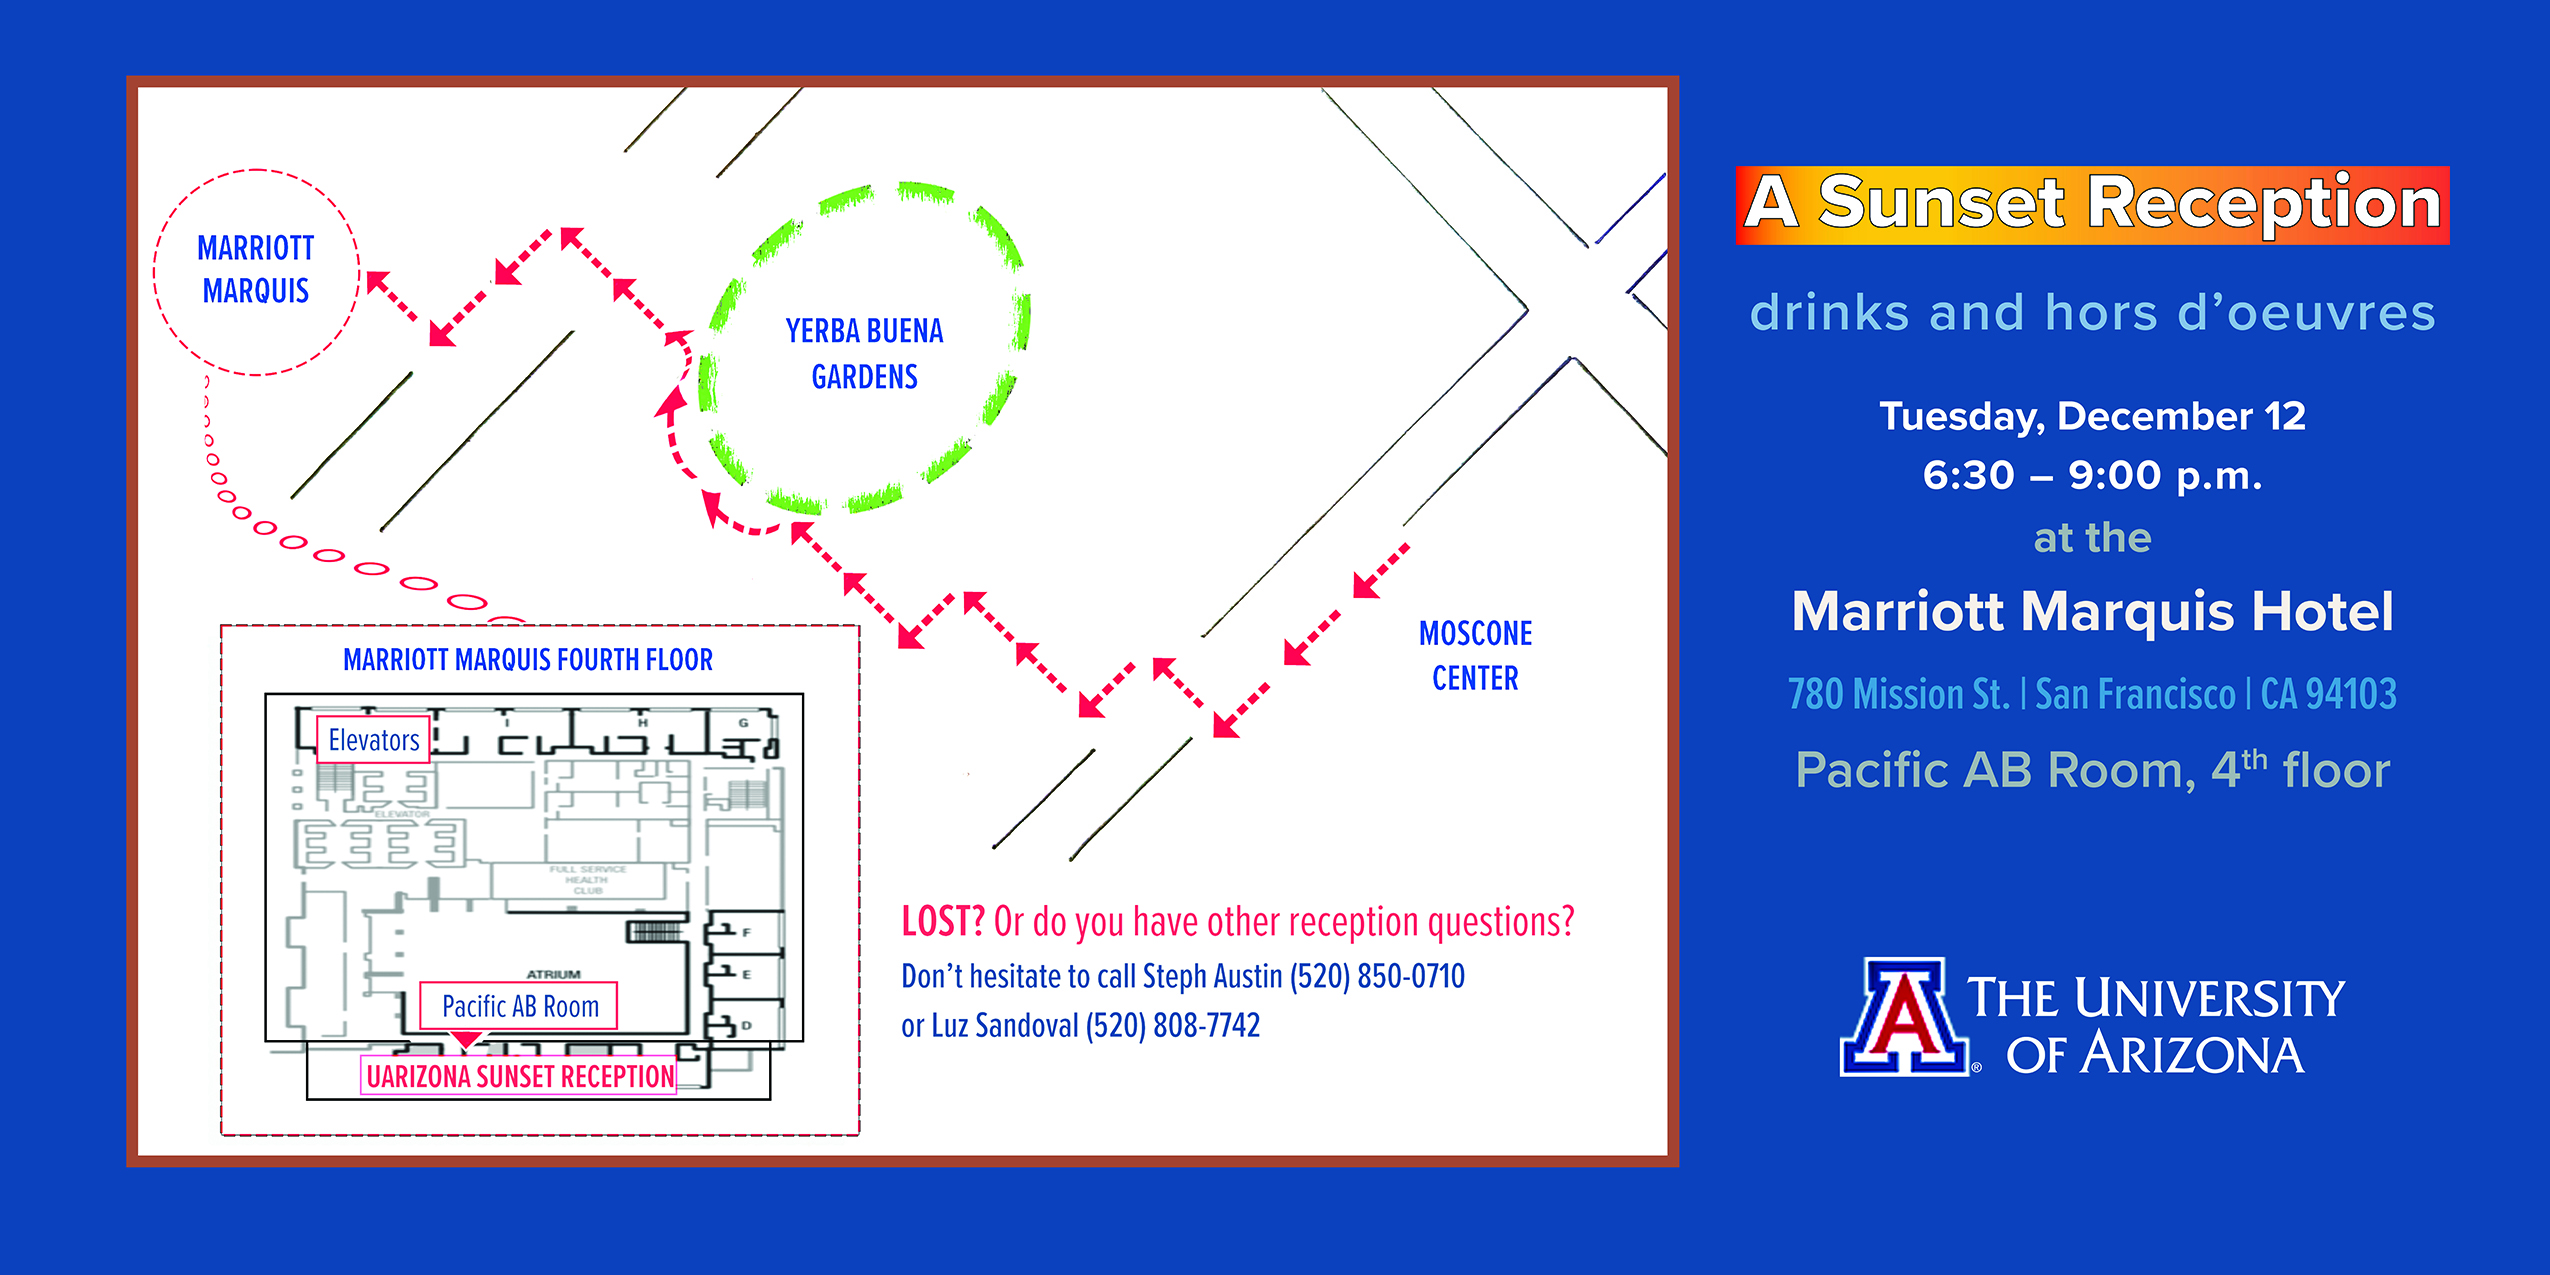 A map to the sunset reception hosted by the University of Arizona.